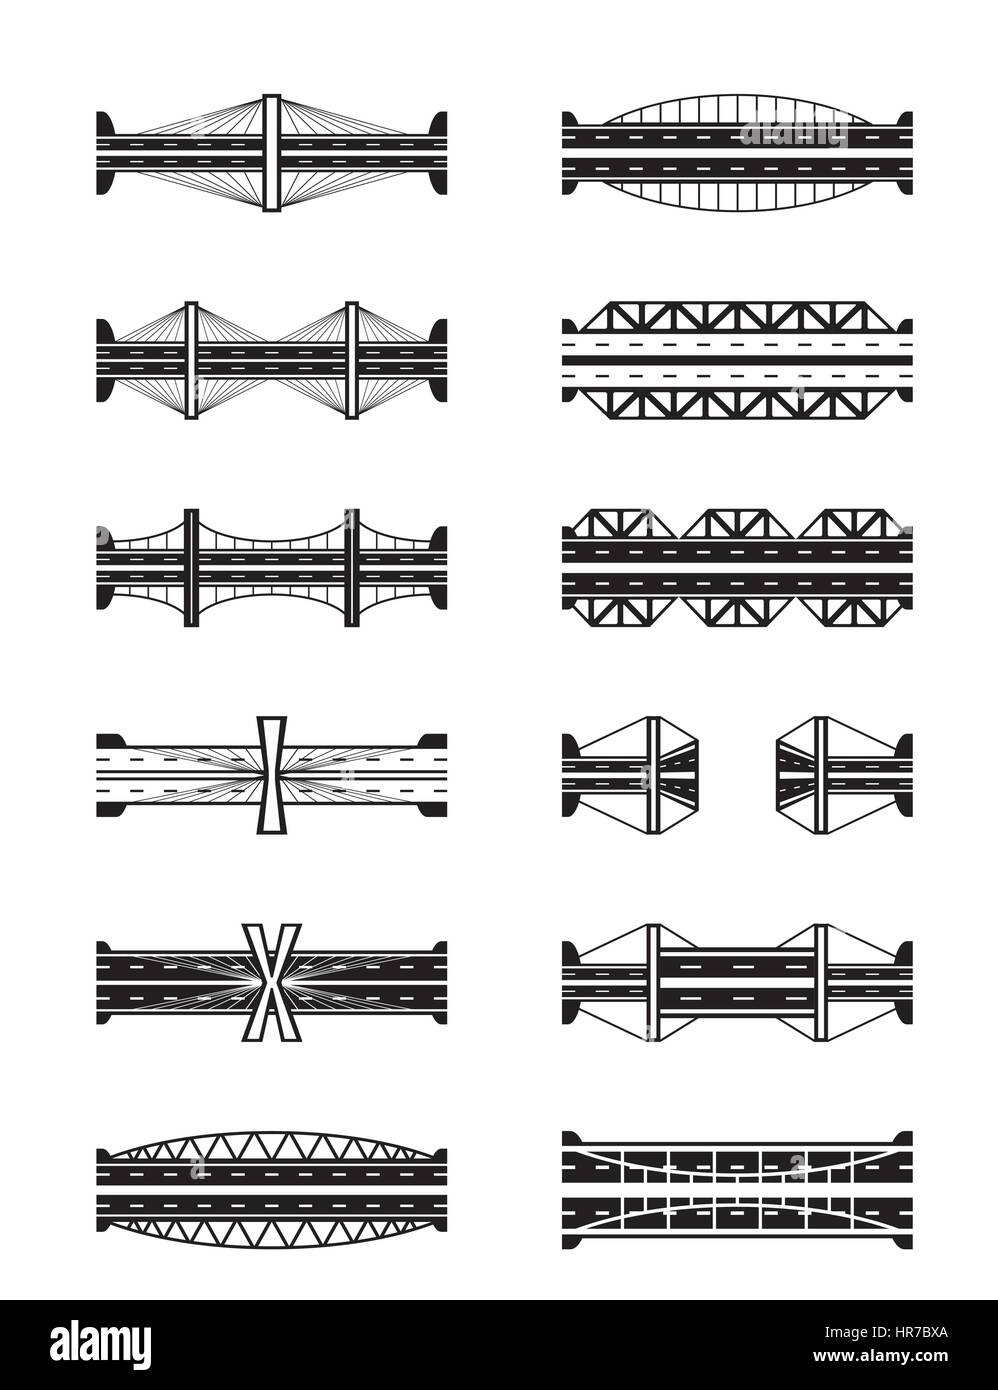 Various types of bridges viewed from above - vector illustration Stock Vector